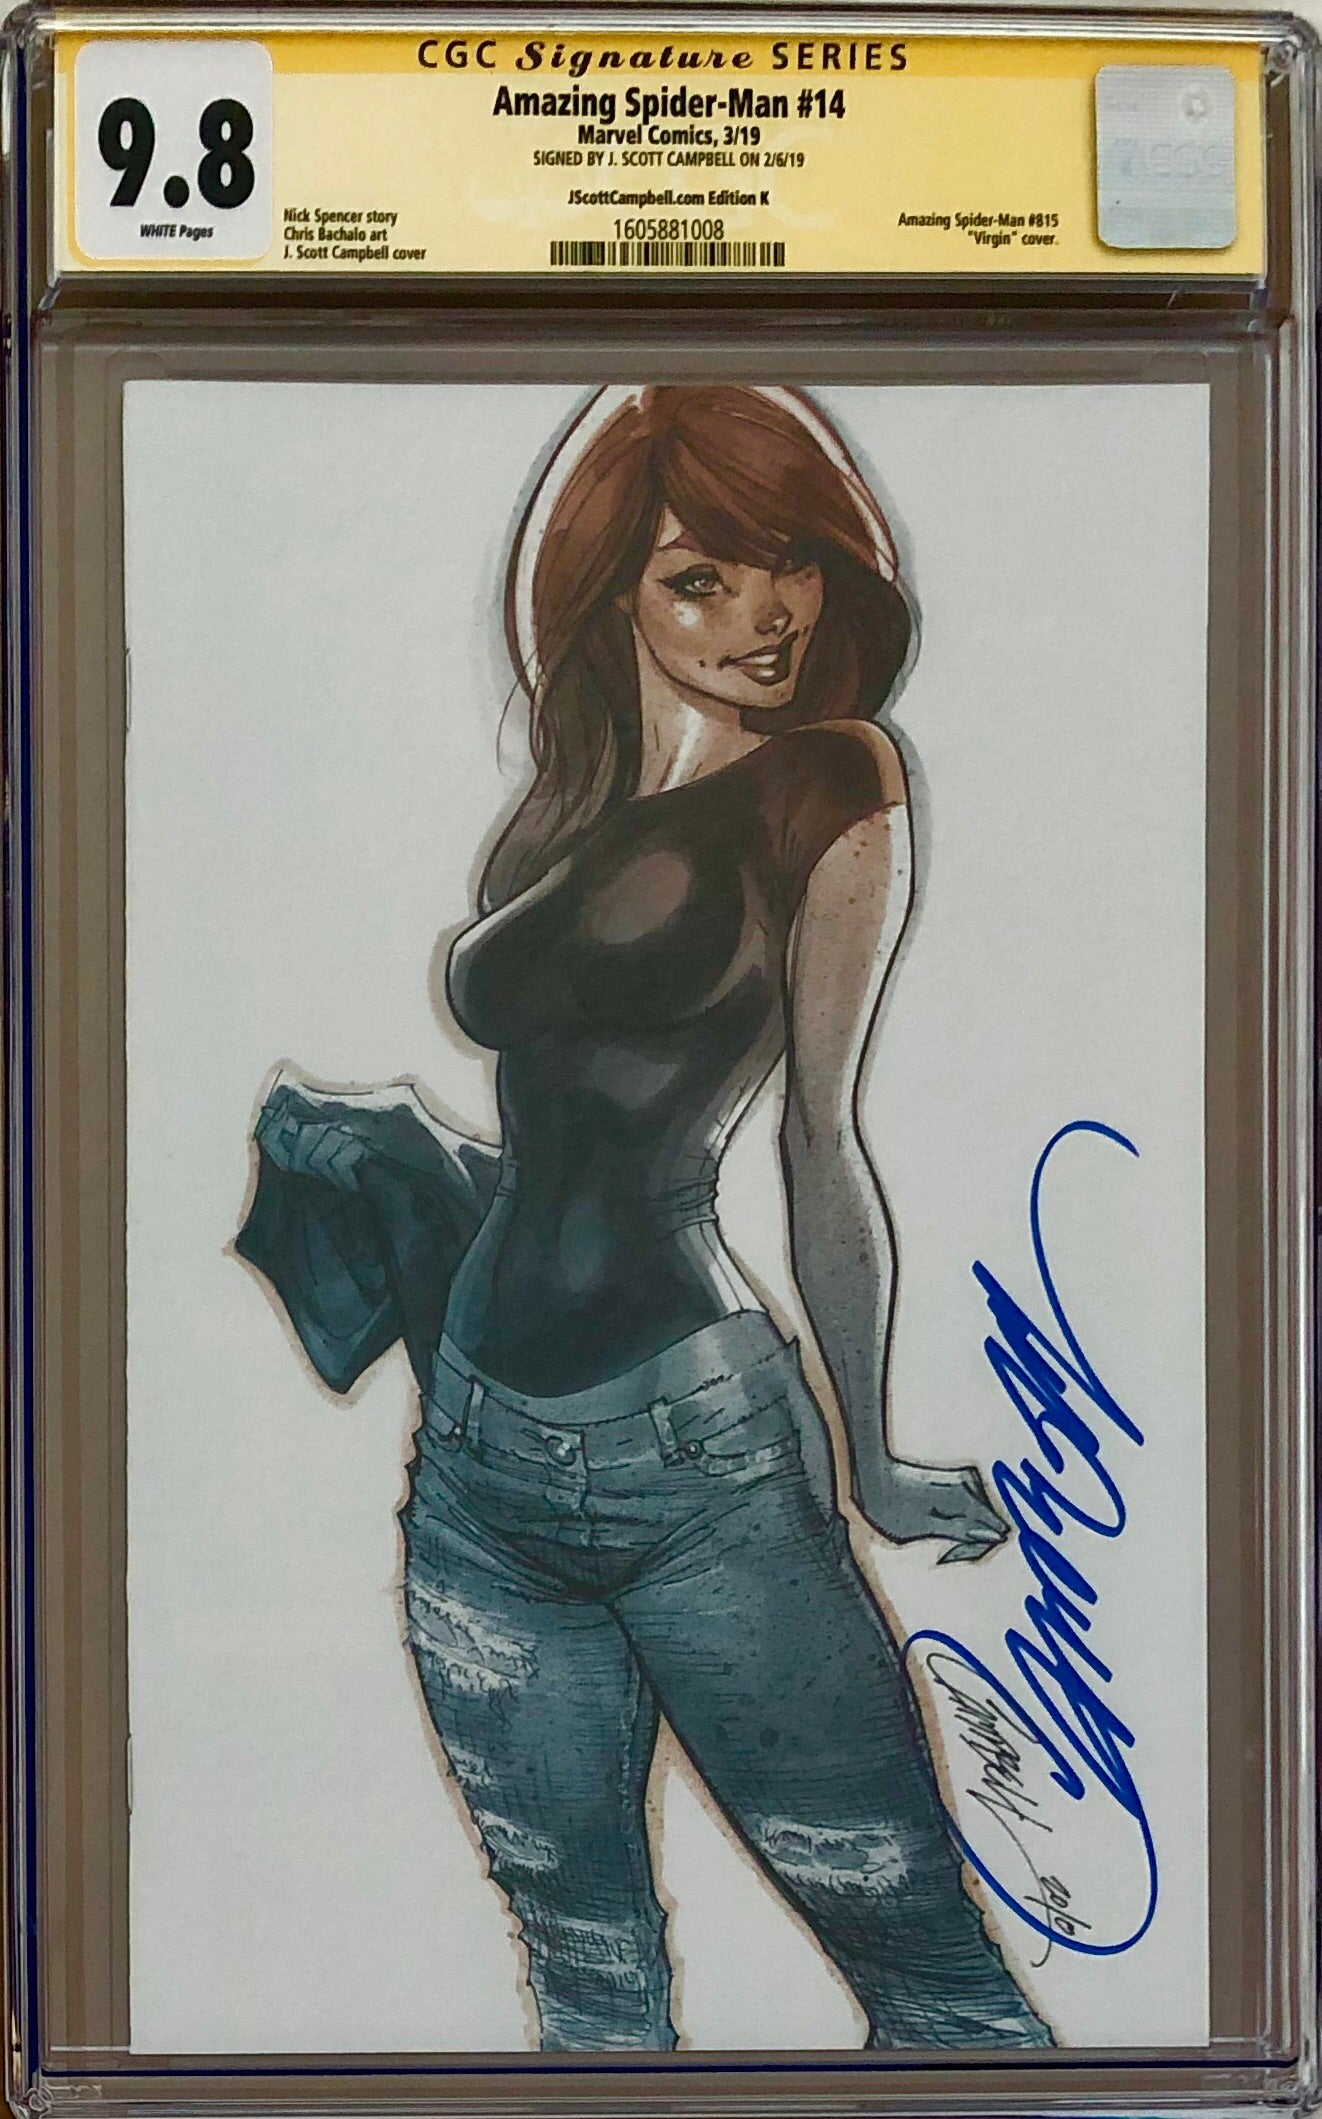 Amazing Spider-Man #14 J. Scott Campbell Edition K "Face it Tiger" MJ SDCC Virgin Exclusive CGC 9.8 SS